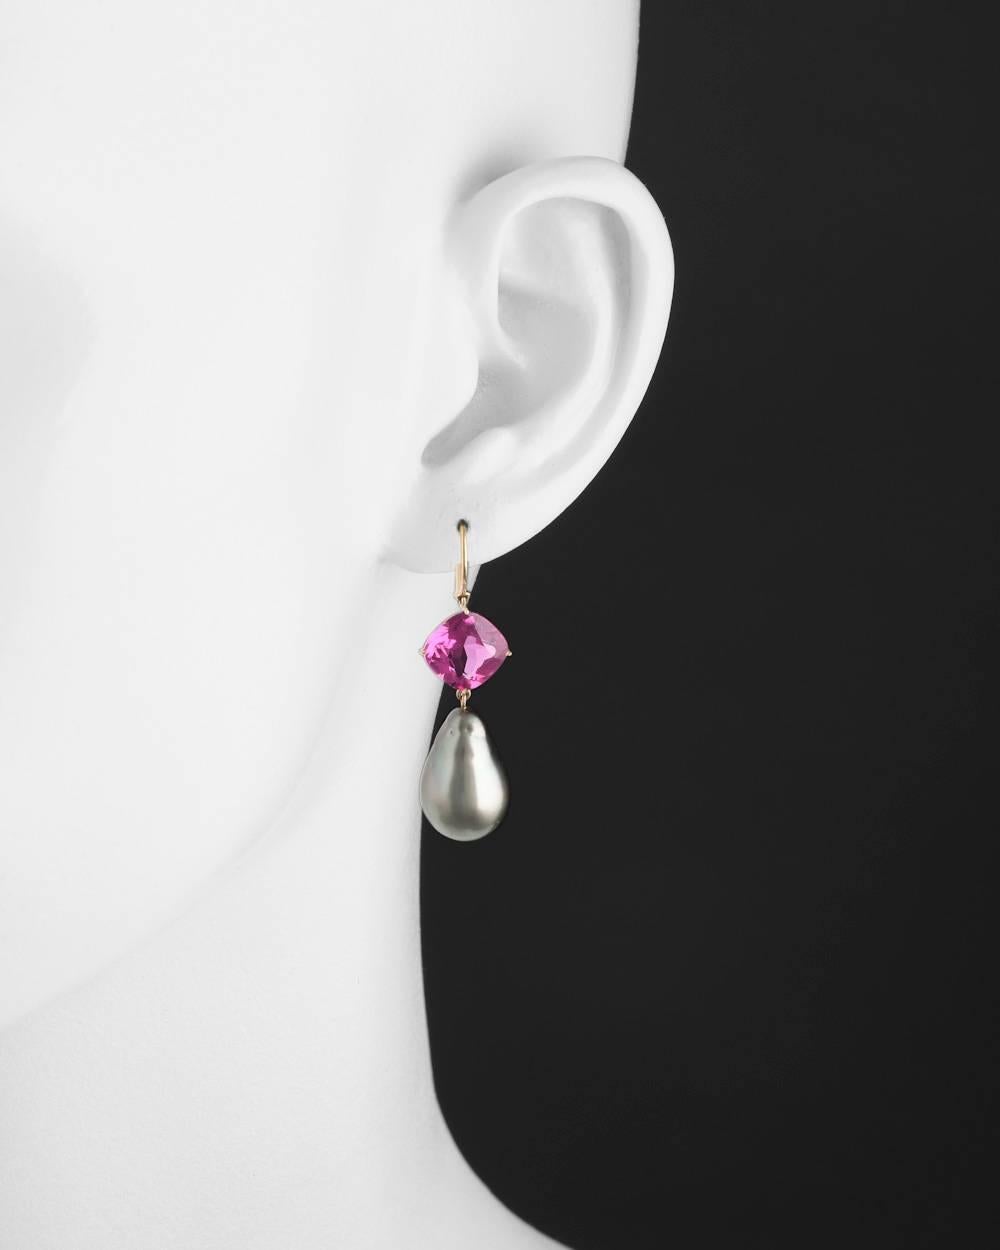 Frenchwire drop earrings, with a gray baroque cultured pearl drop suspended from a cushion-shaped pink tourmaline, in 18k pink gold. Baroque pearl measuring approximately 18 x 12mm and pink tourmaline measuring approximately 11mm in diameter. 1.65